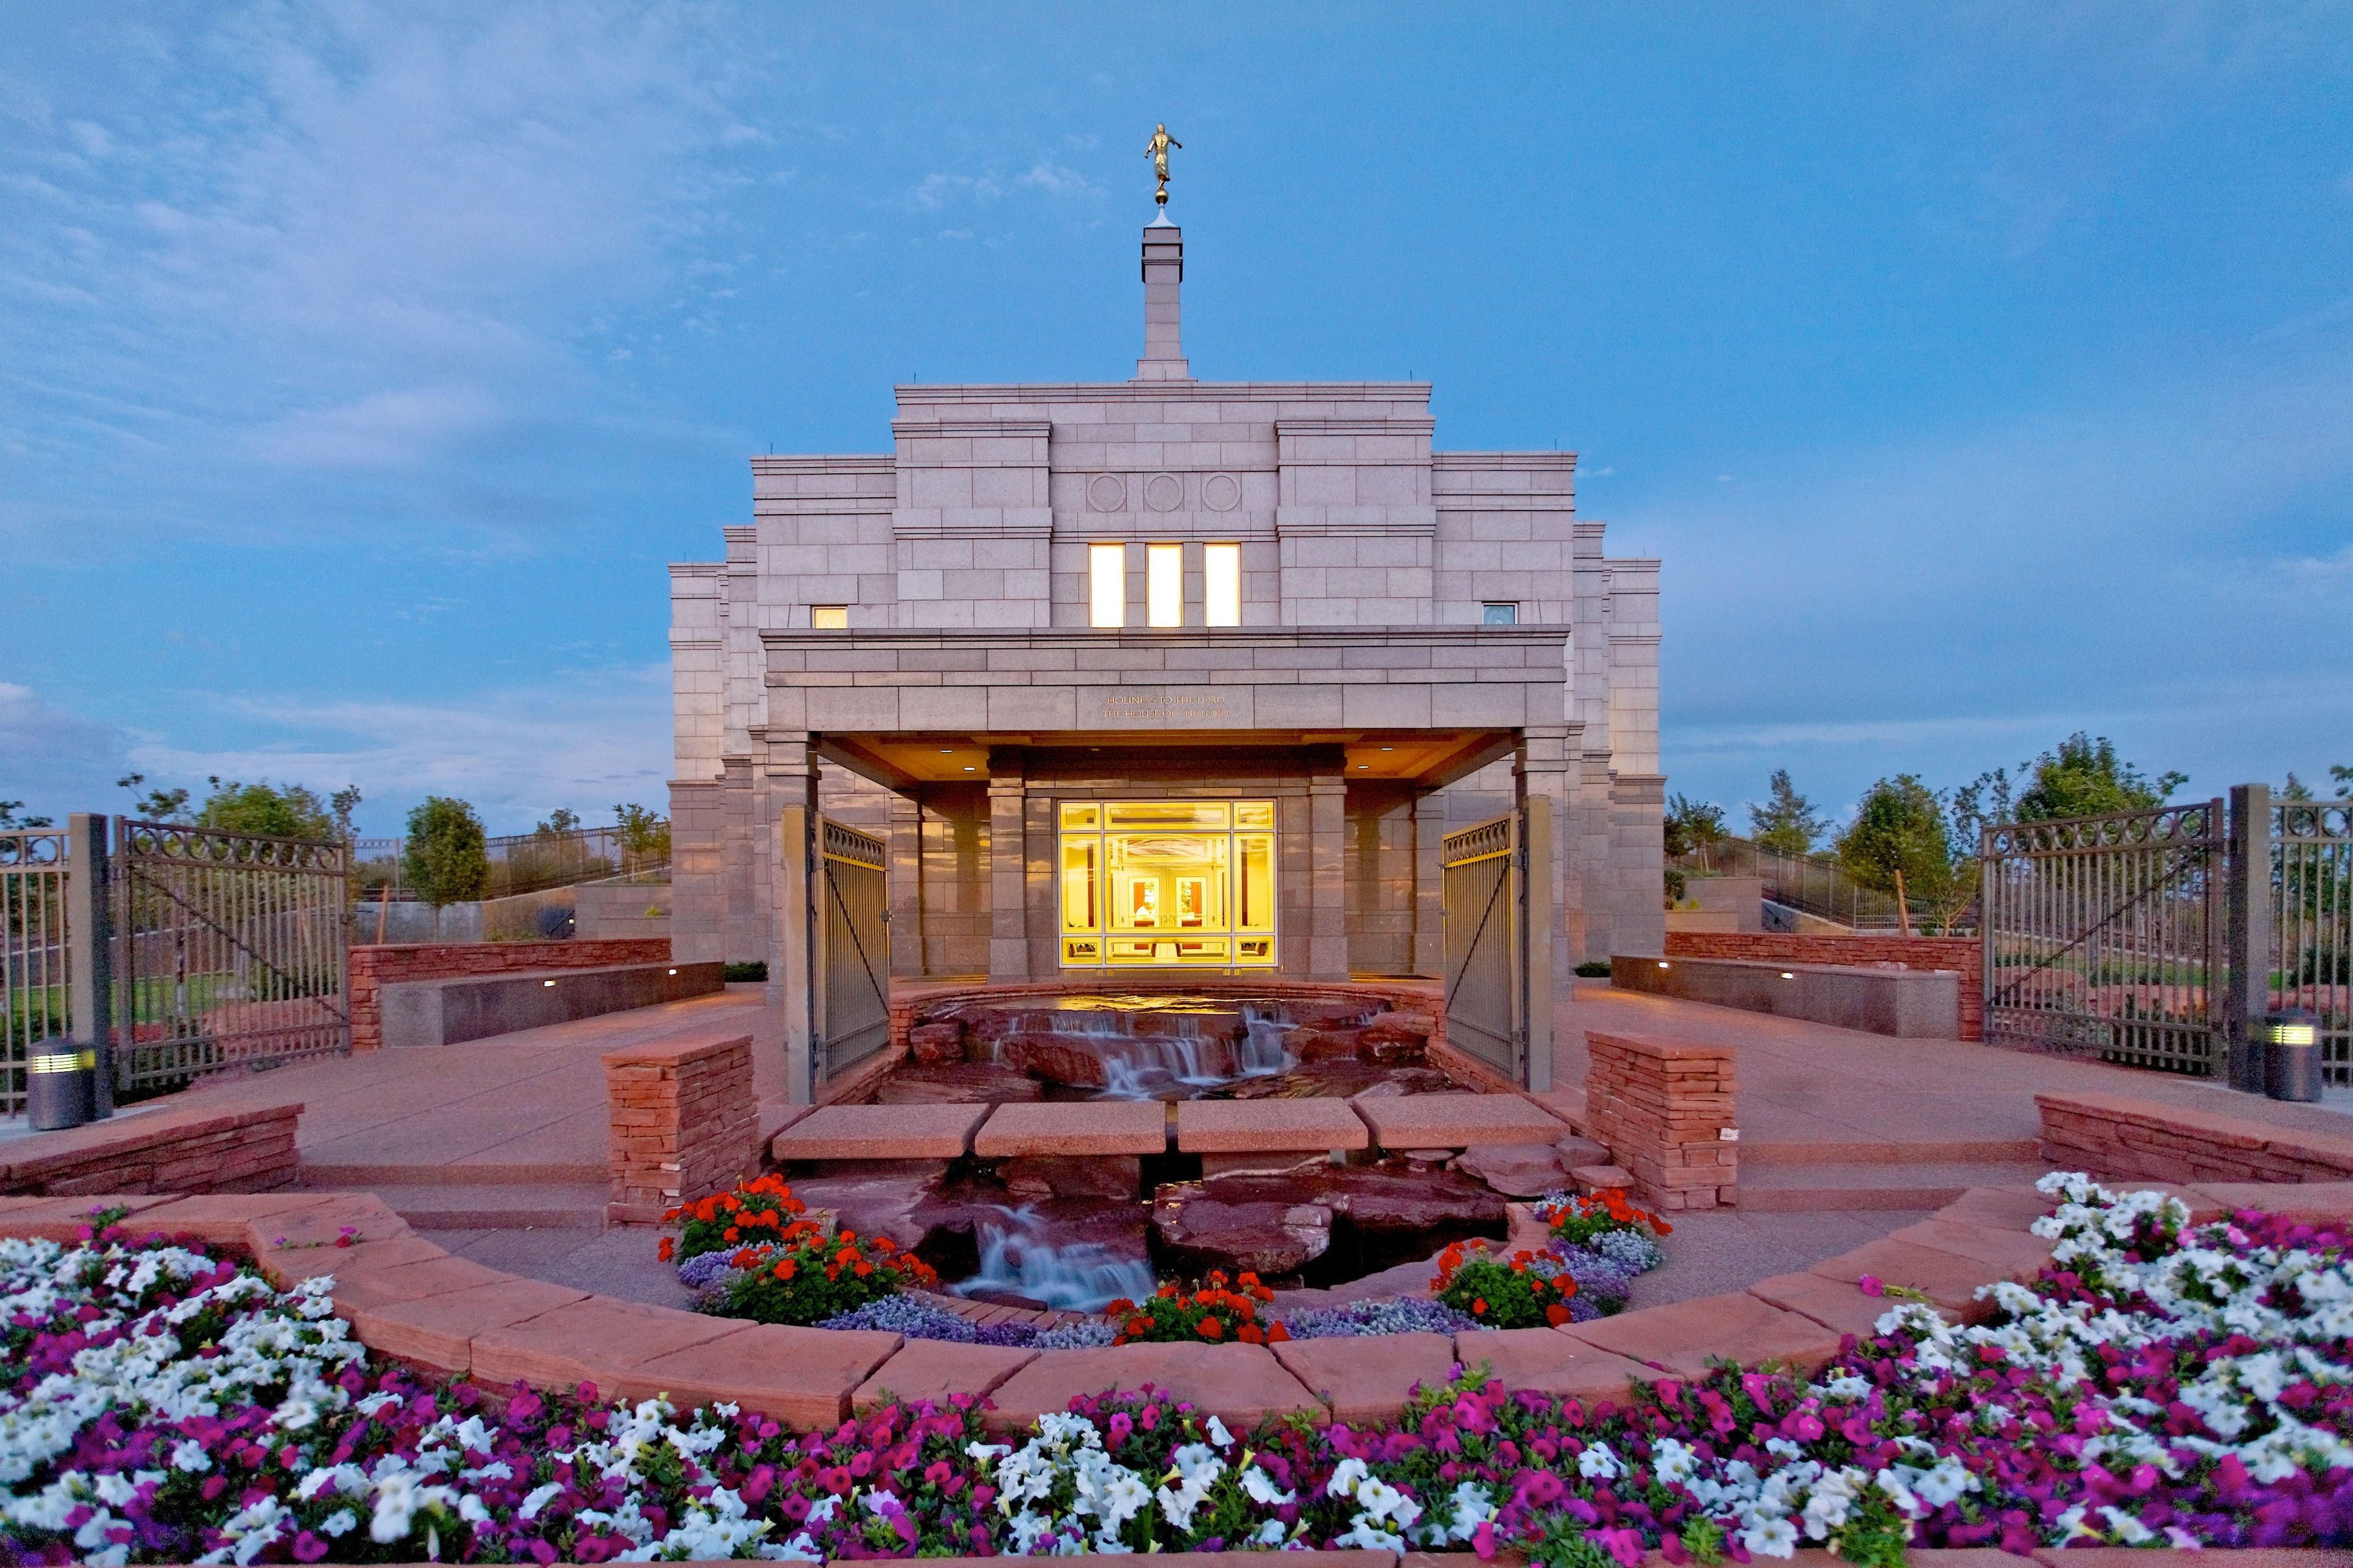 The Snowflake Arizona Temple, including the entrance and flowers, in the evening.